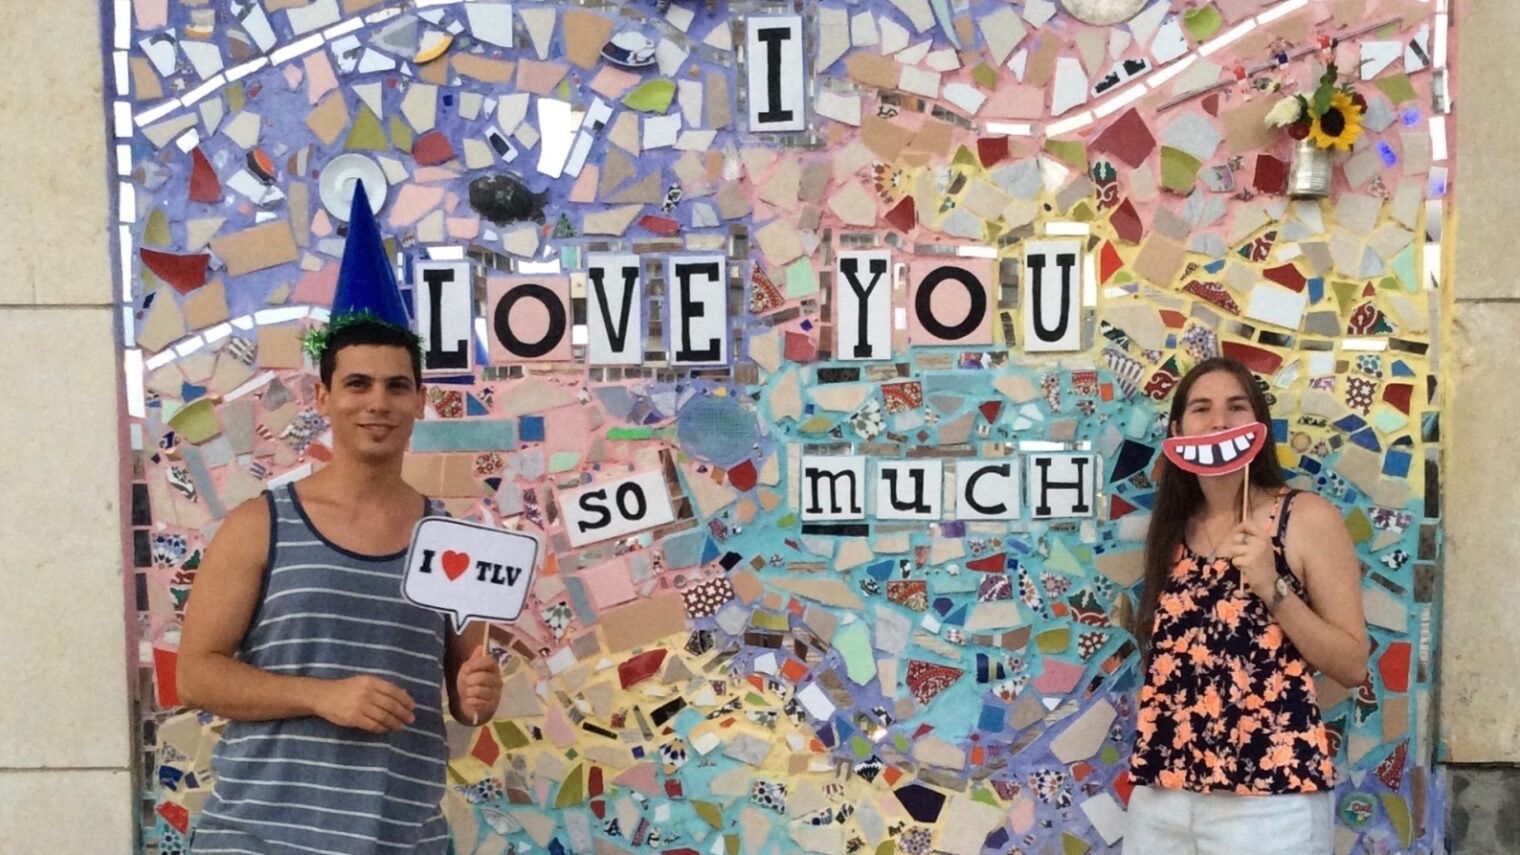 Mia Schon’s “I love you so much” mosaic mural in Tel Aviv attracts lots of attention. Photo: courtesy